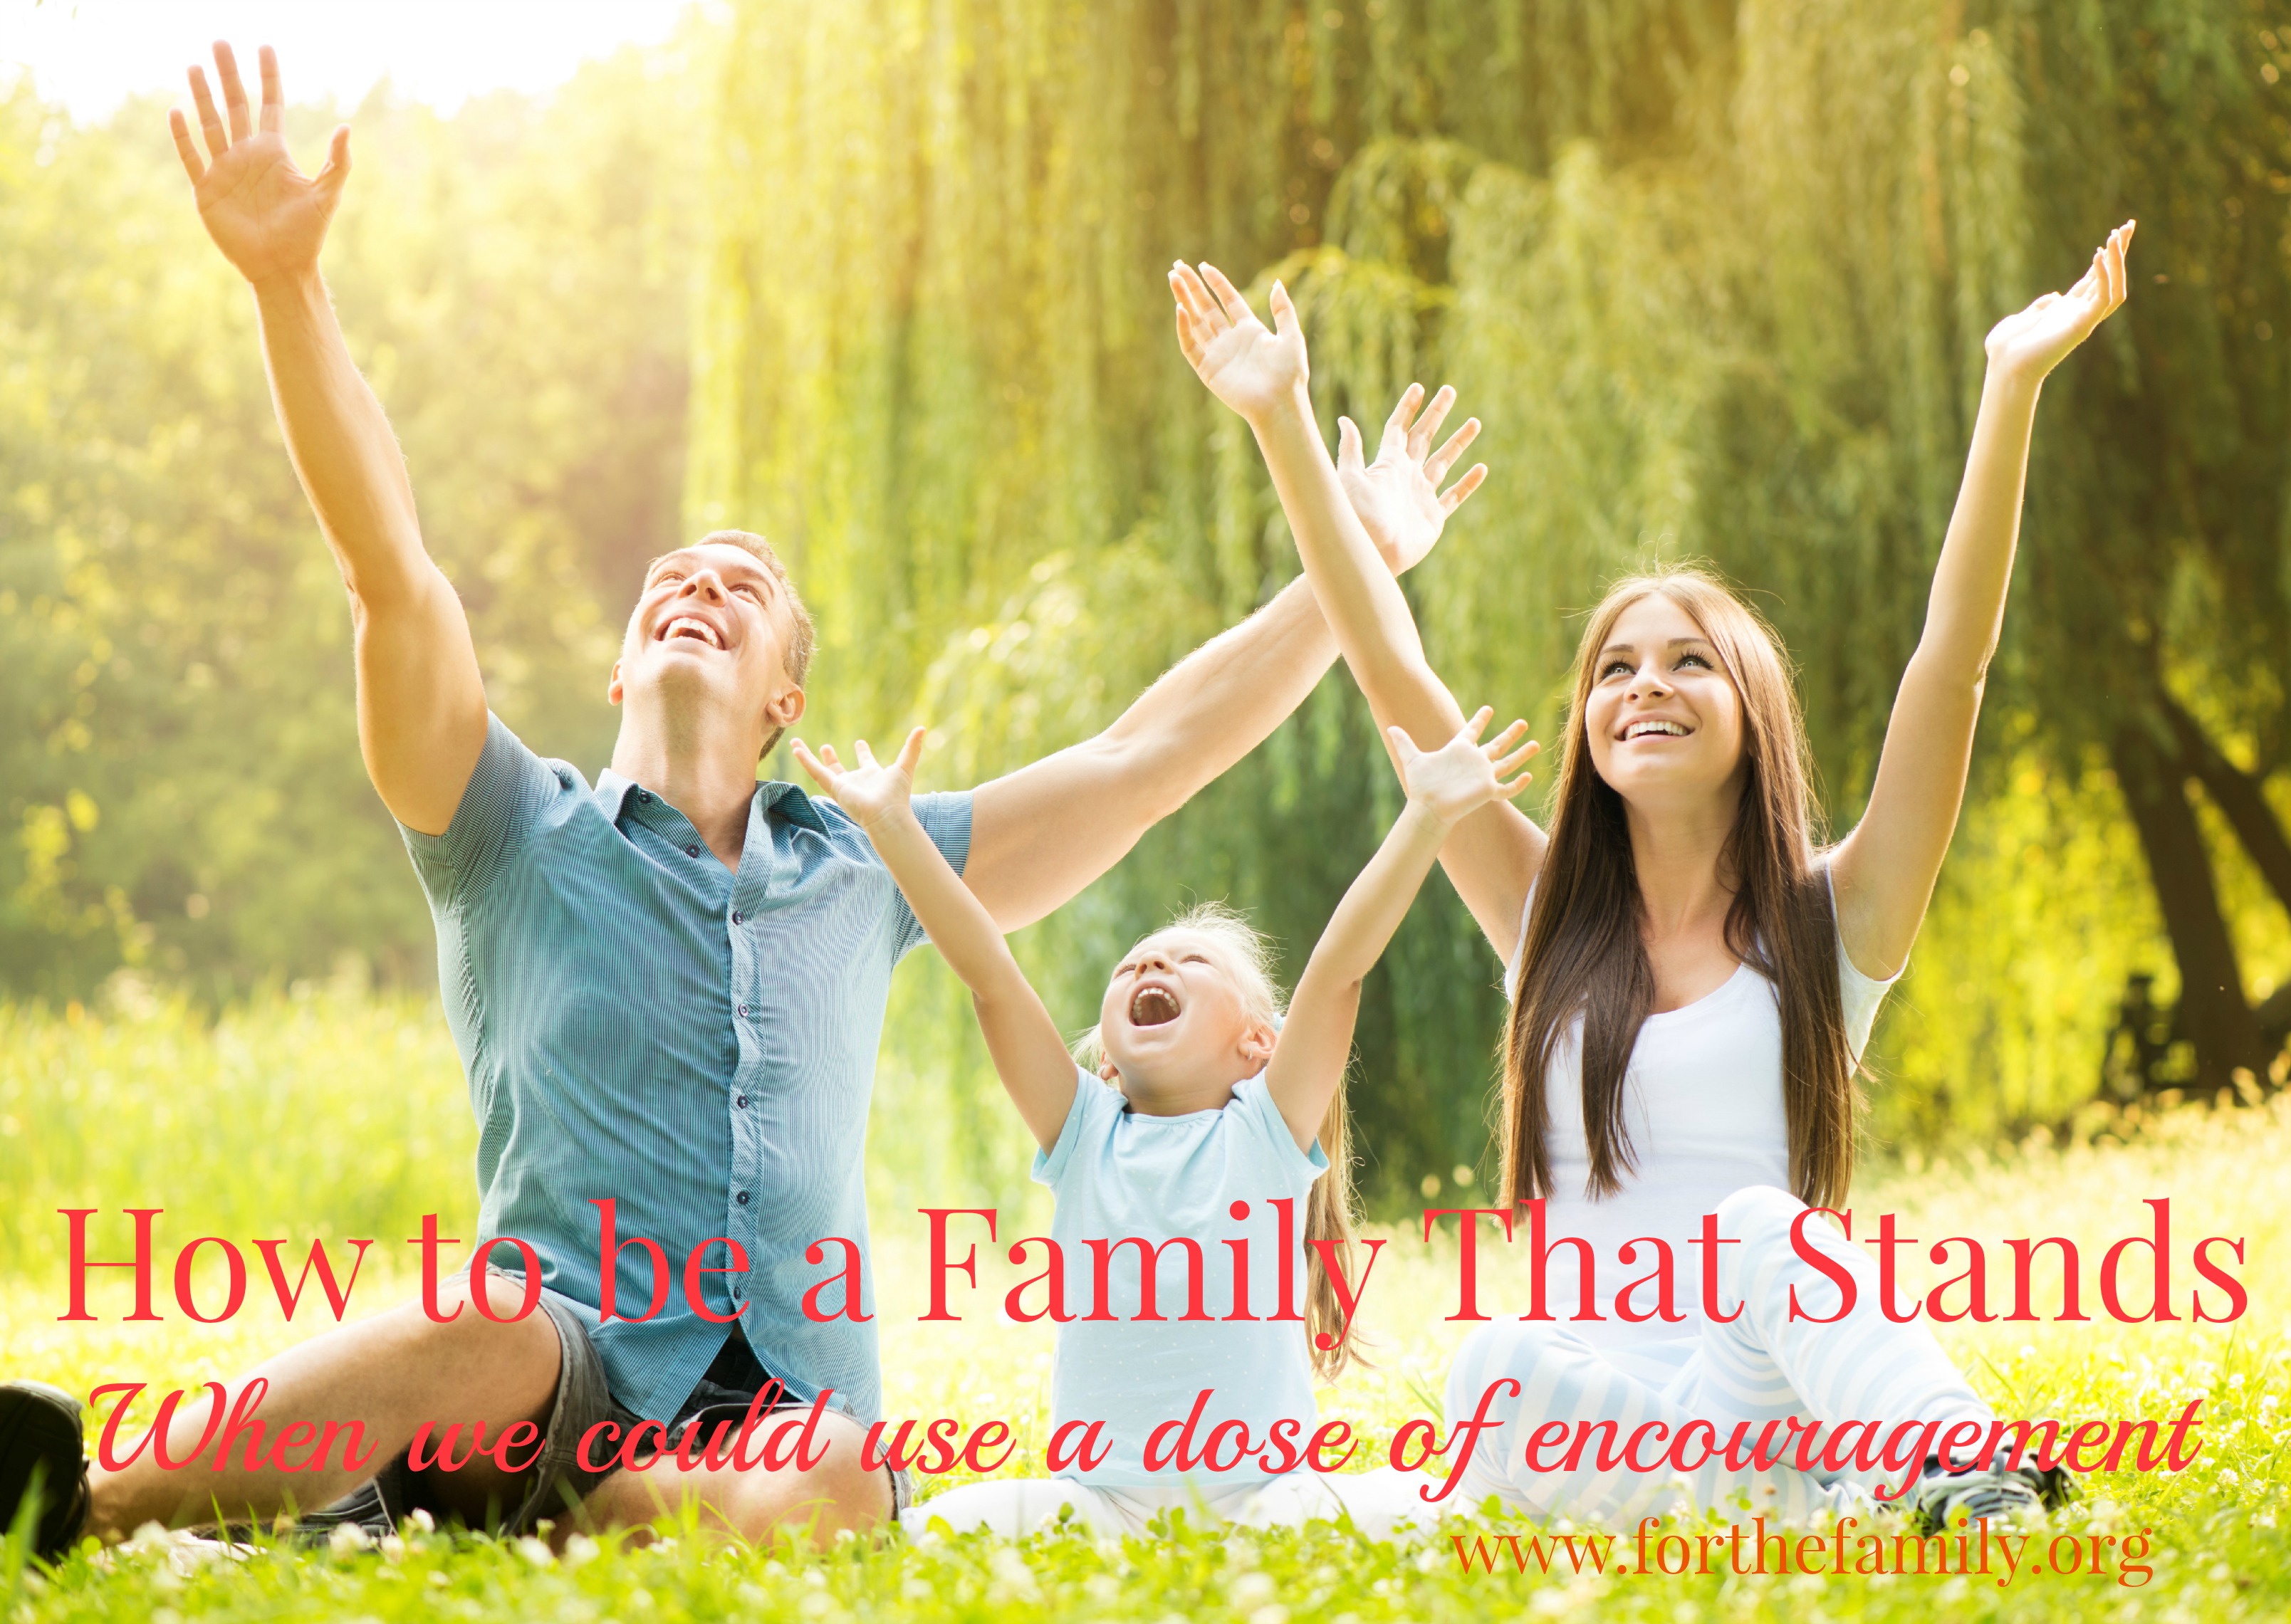 How To Be a Family That Stands  (When We Could Use A Good Dose Of Encouragement)